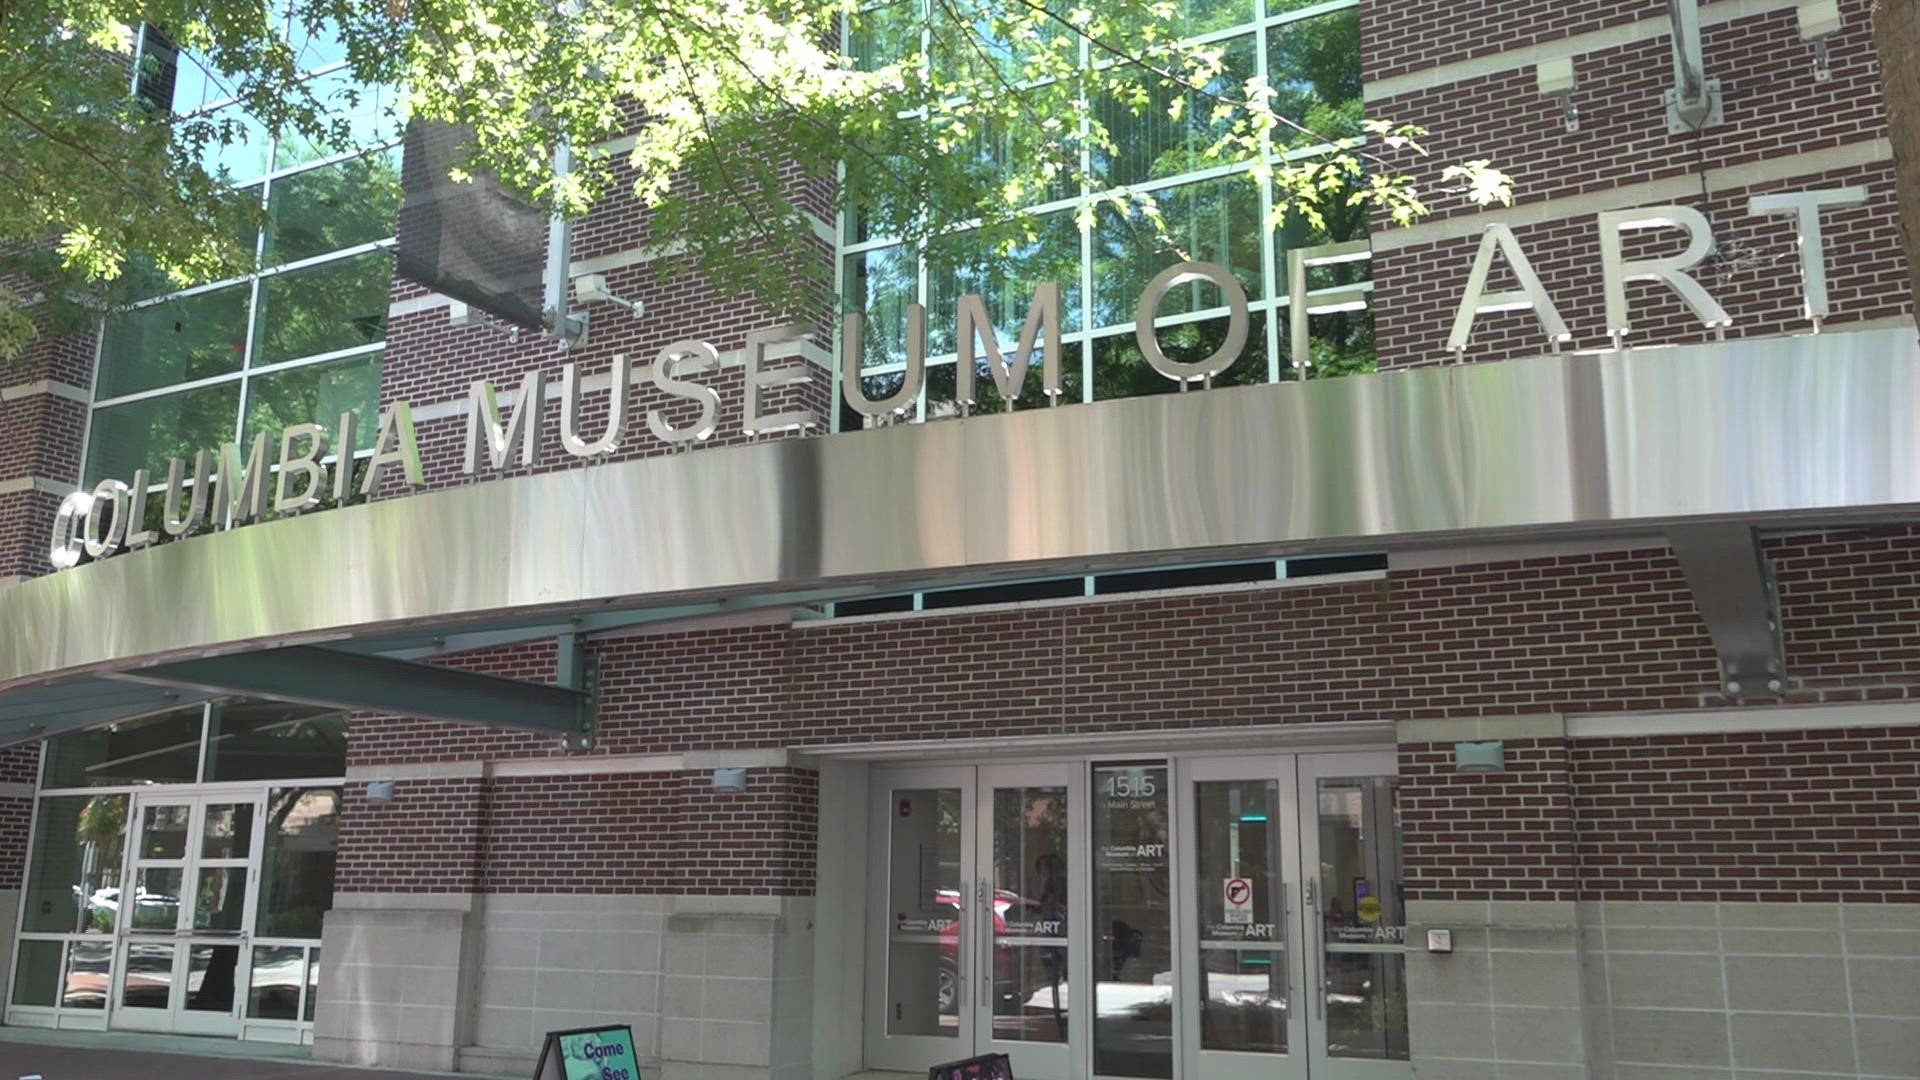 The organizers behind a free event at the Columbia Museum of Art on Sunday said they hoped to expose visitors to Black artists both on the local and national levels.